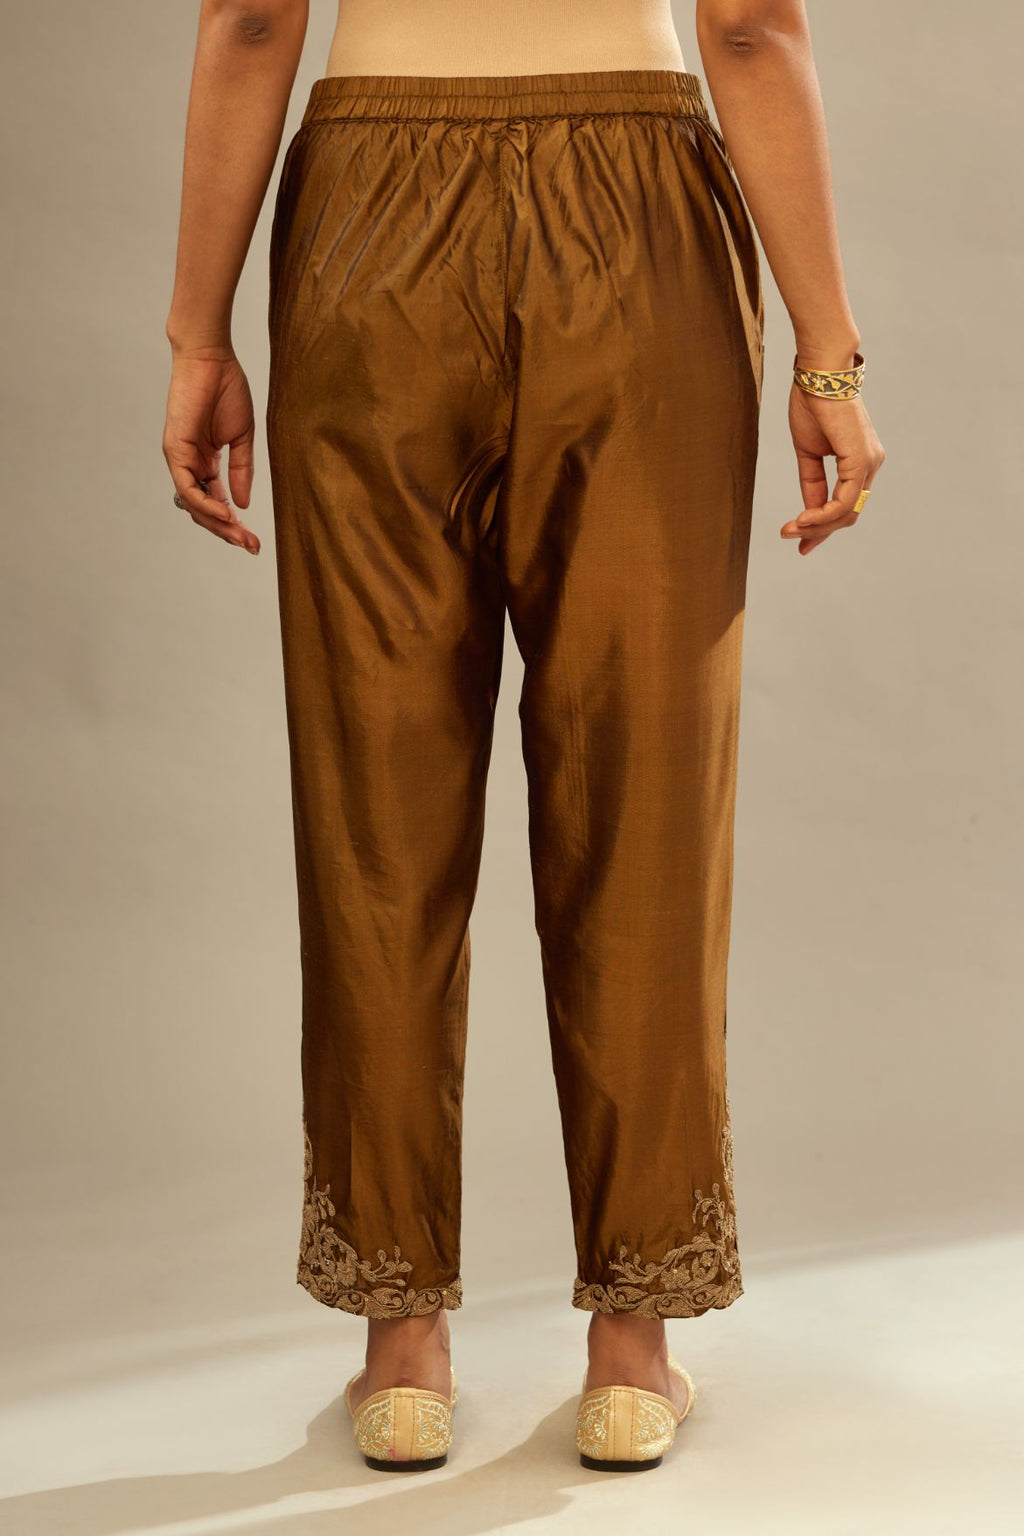 Golden olive silk pants with dori embroidered bootas at hem.